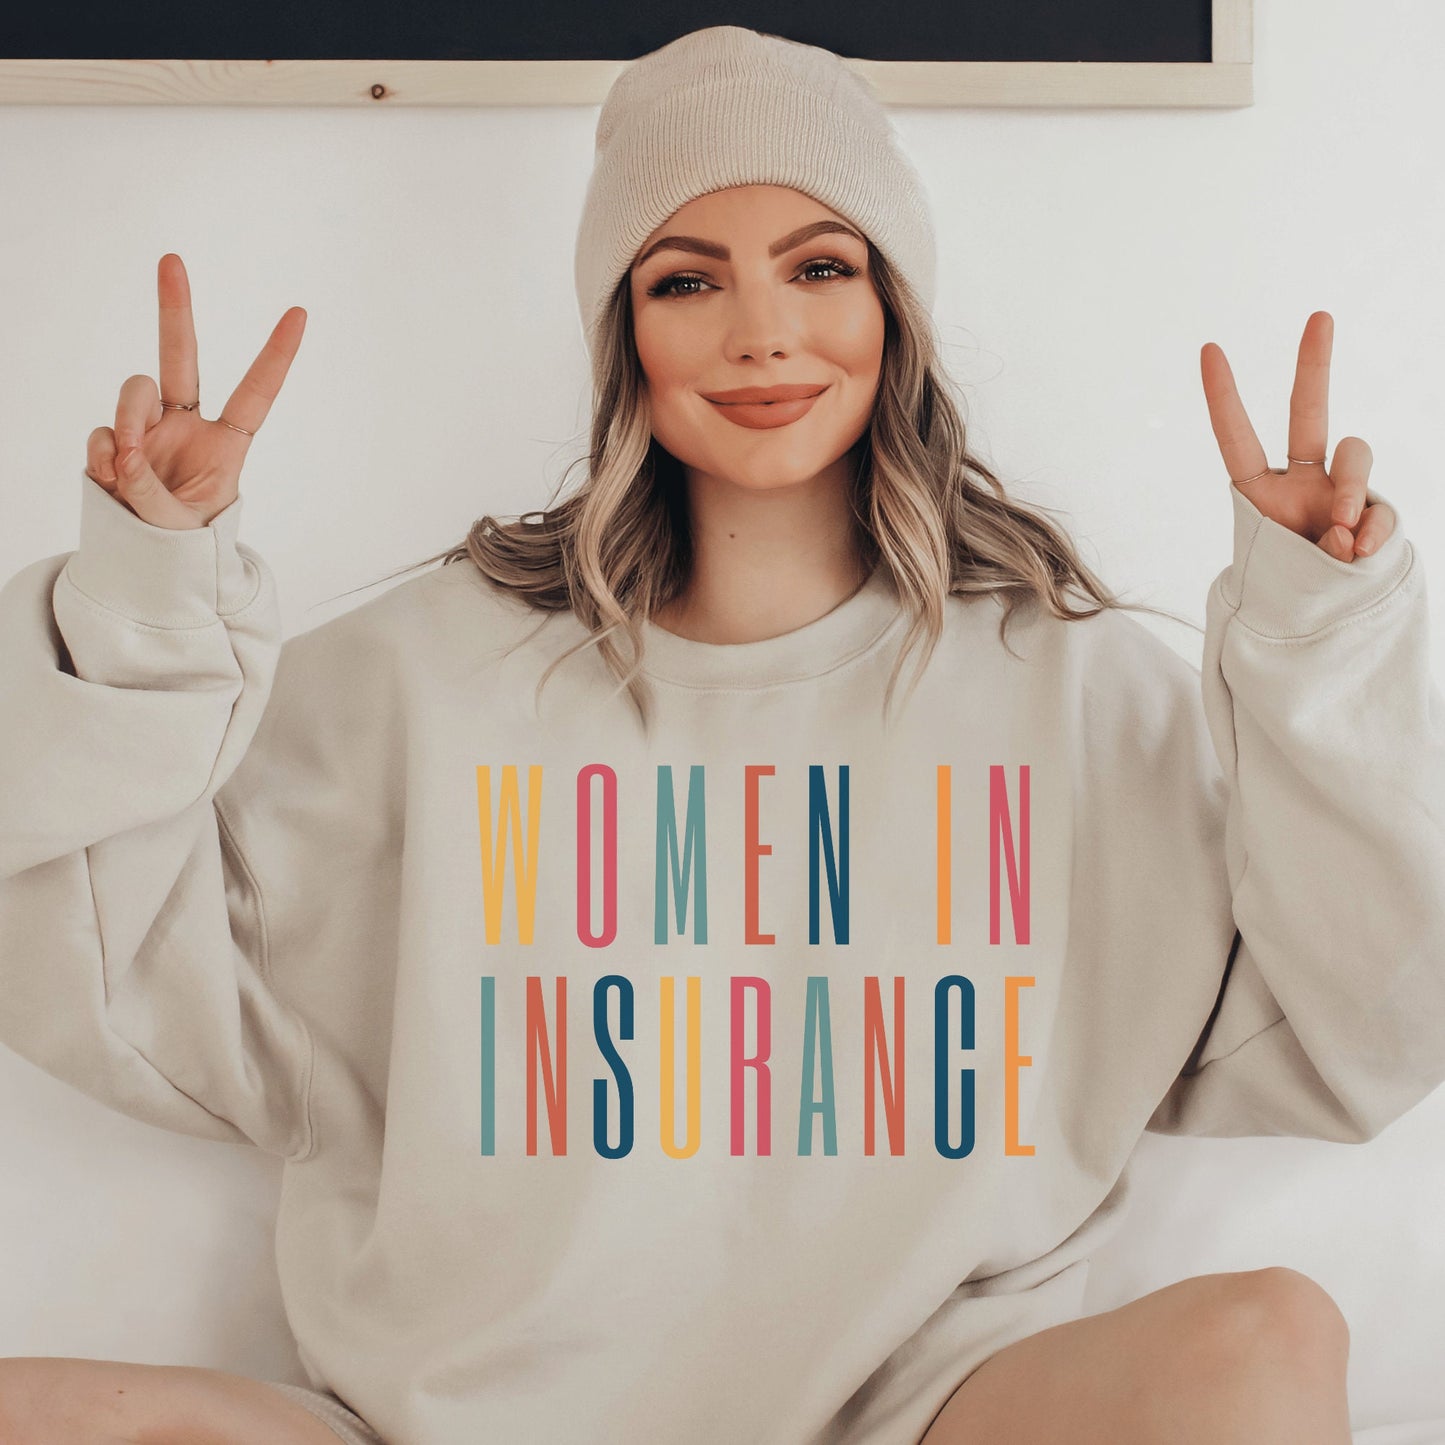 beige unisex sweatshirt that says "women in insurance" in all capital, multicolored letters and makes the perfect gift for an insurance agent